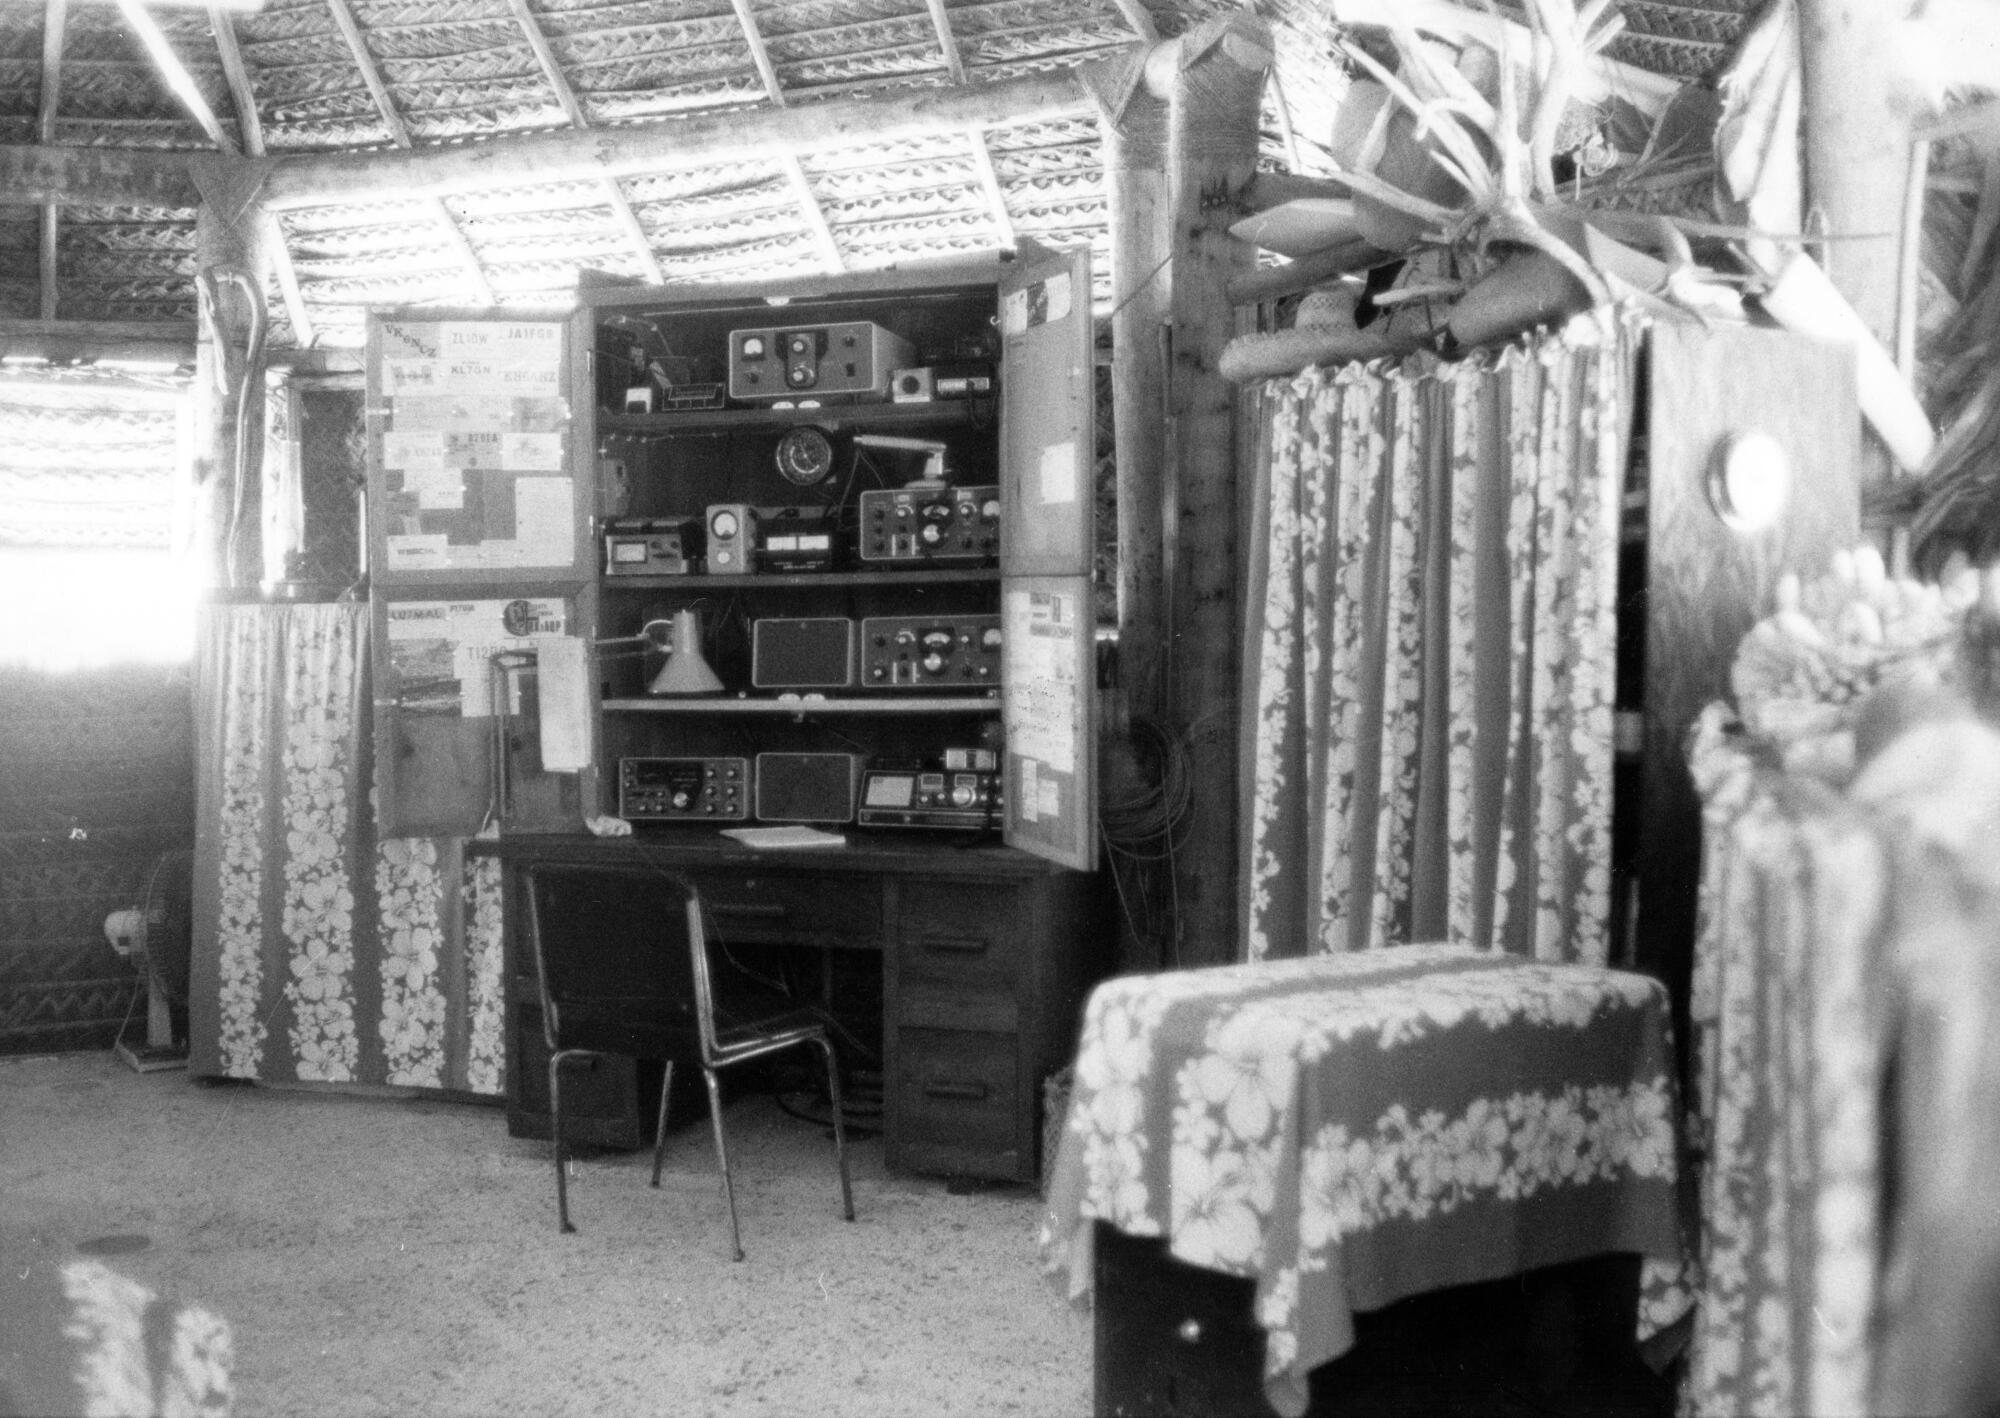 A bungalow holds a desk and shelves filled with ham radio equipment.